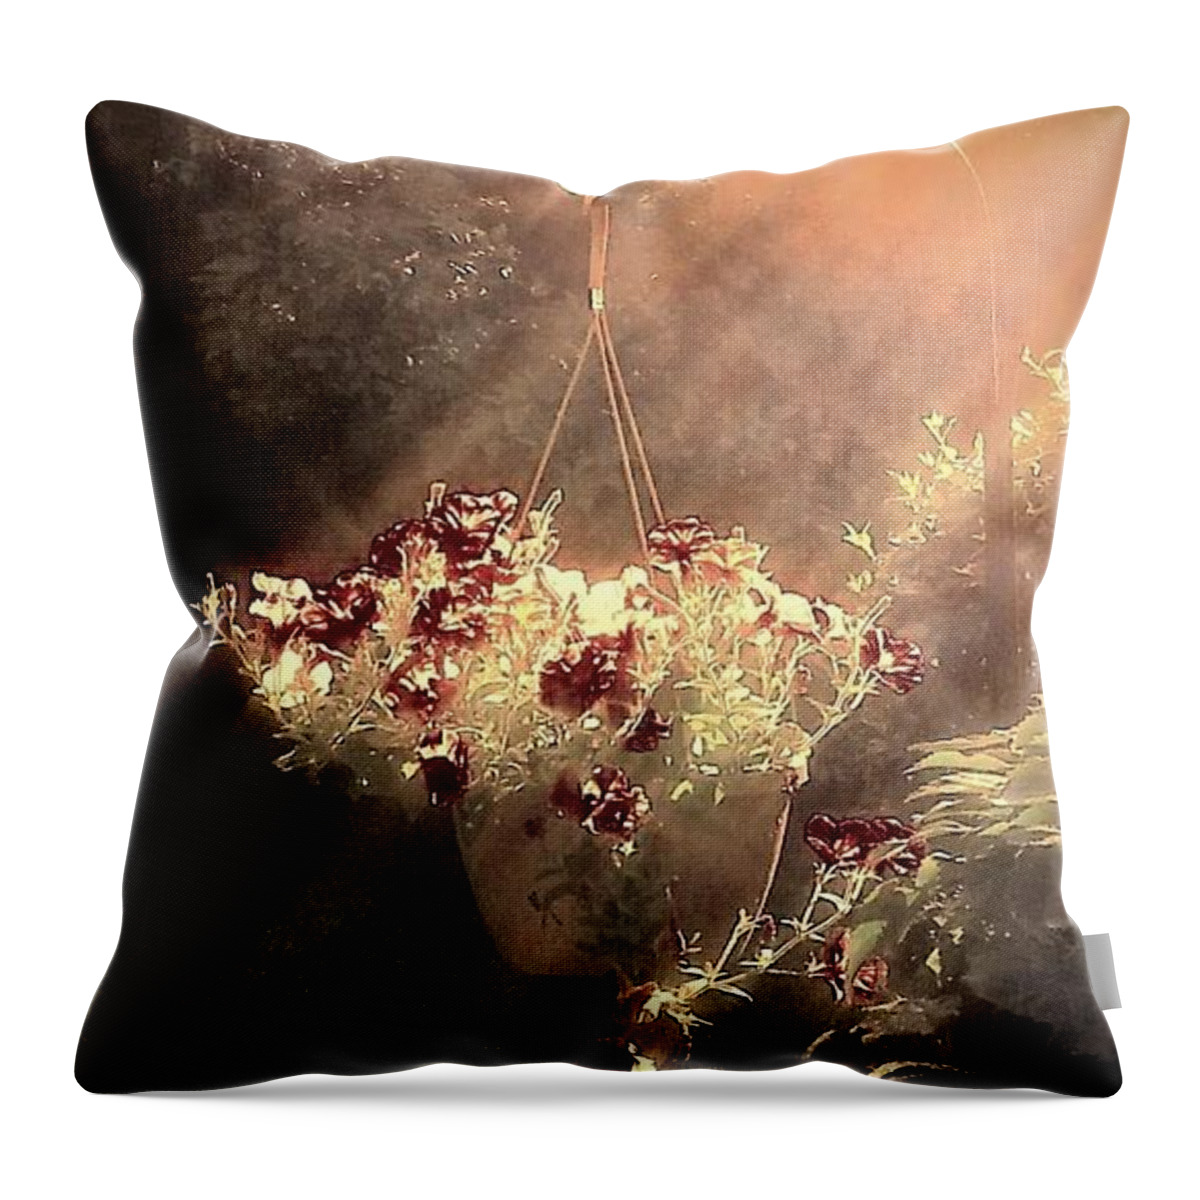 Sun Throw Pillow featuring the photograph Just Dreaming by Dani McEvoy